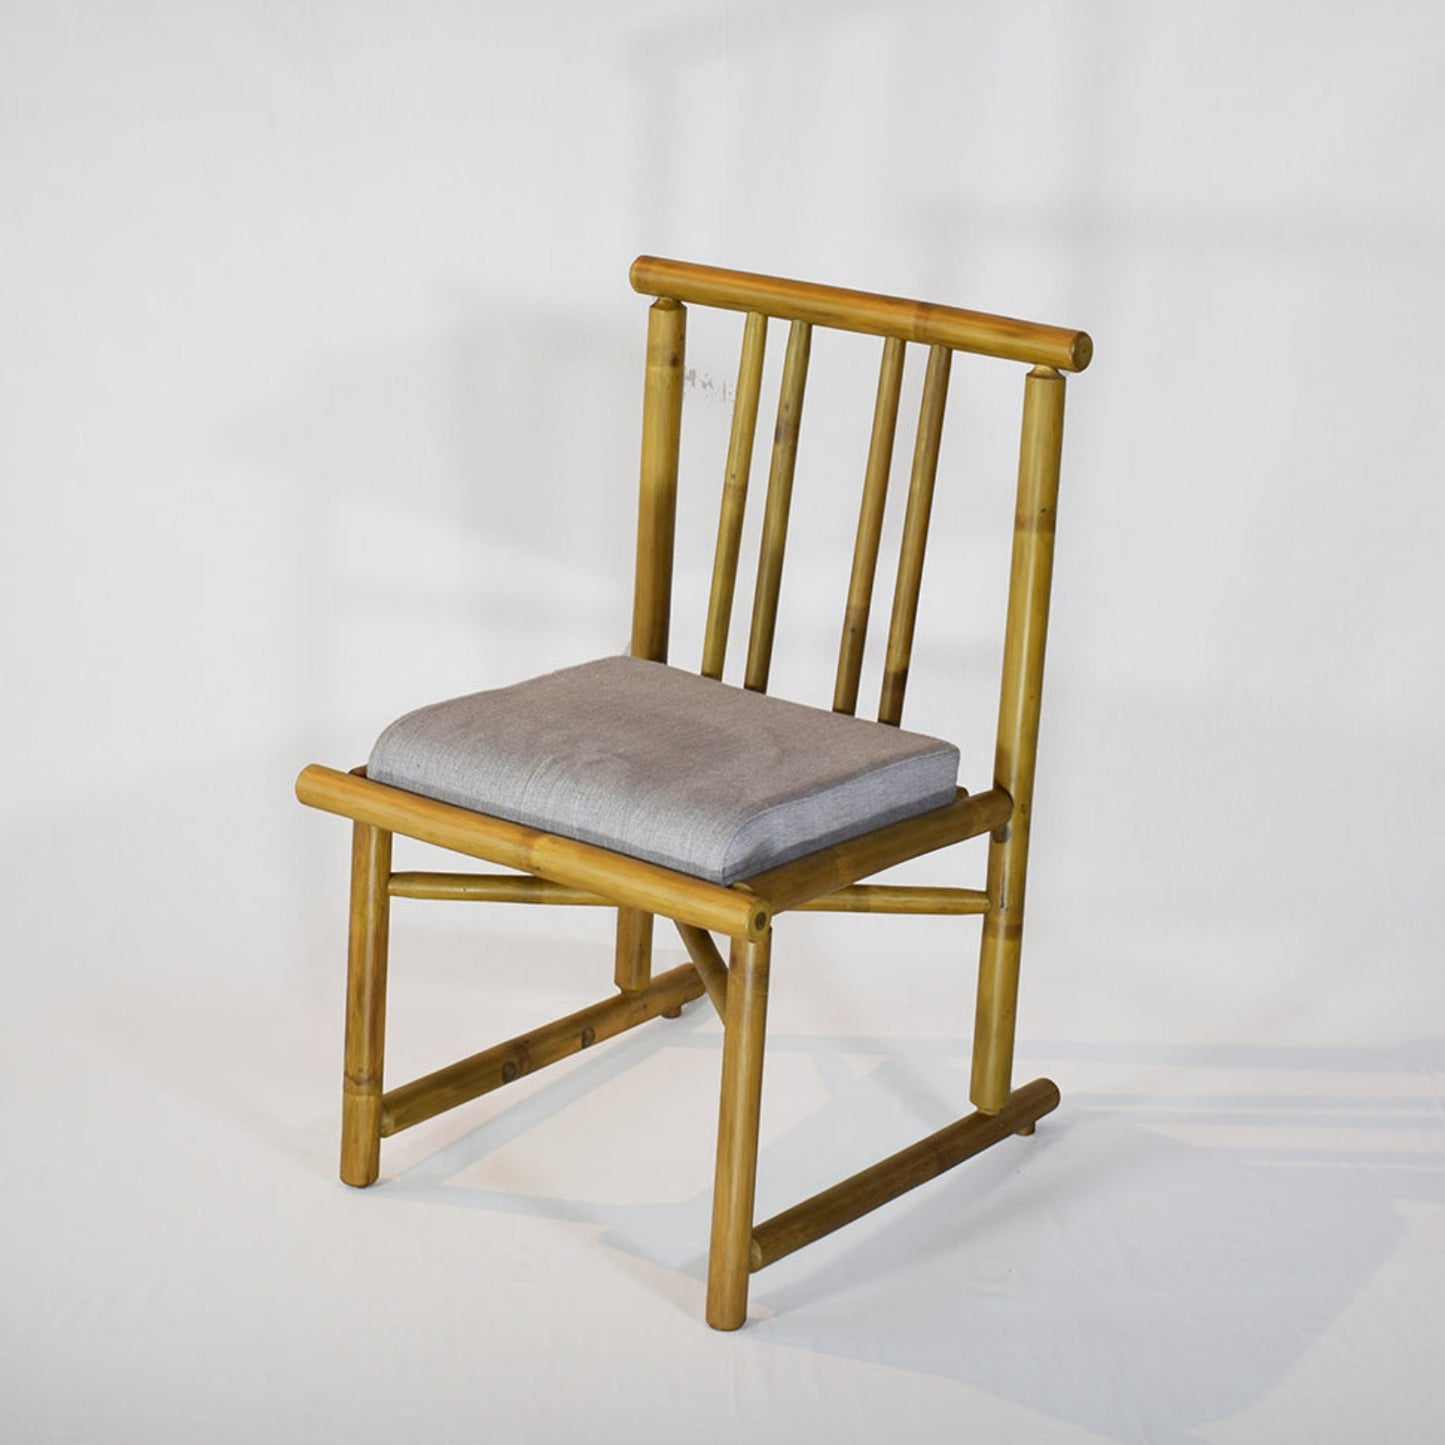 Upright Bamboo Chair with Cushion Seat